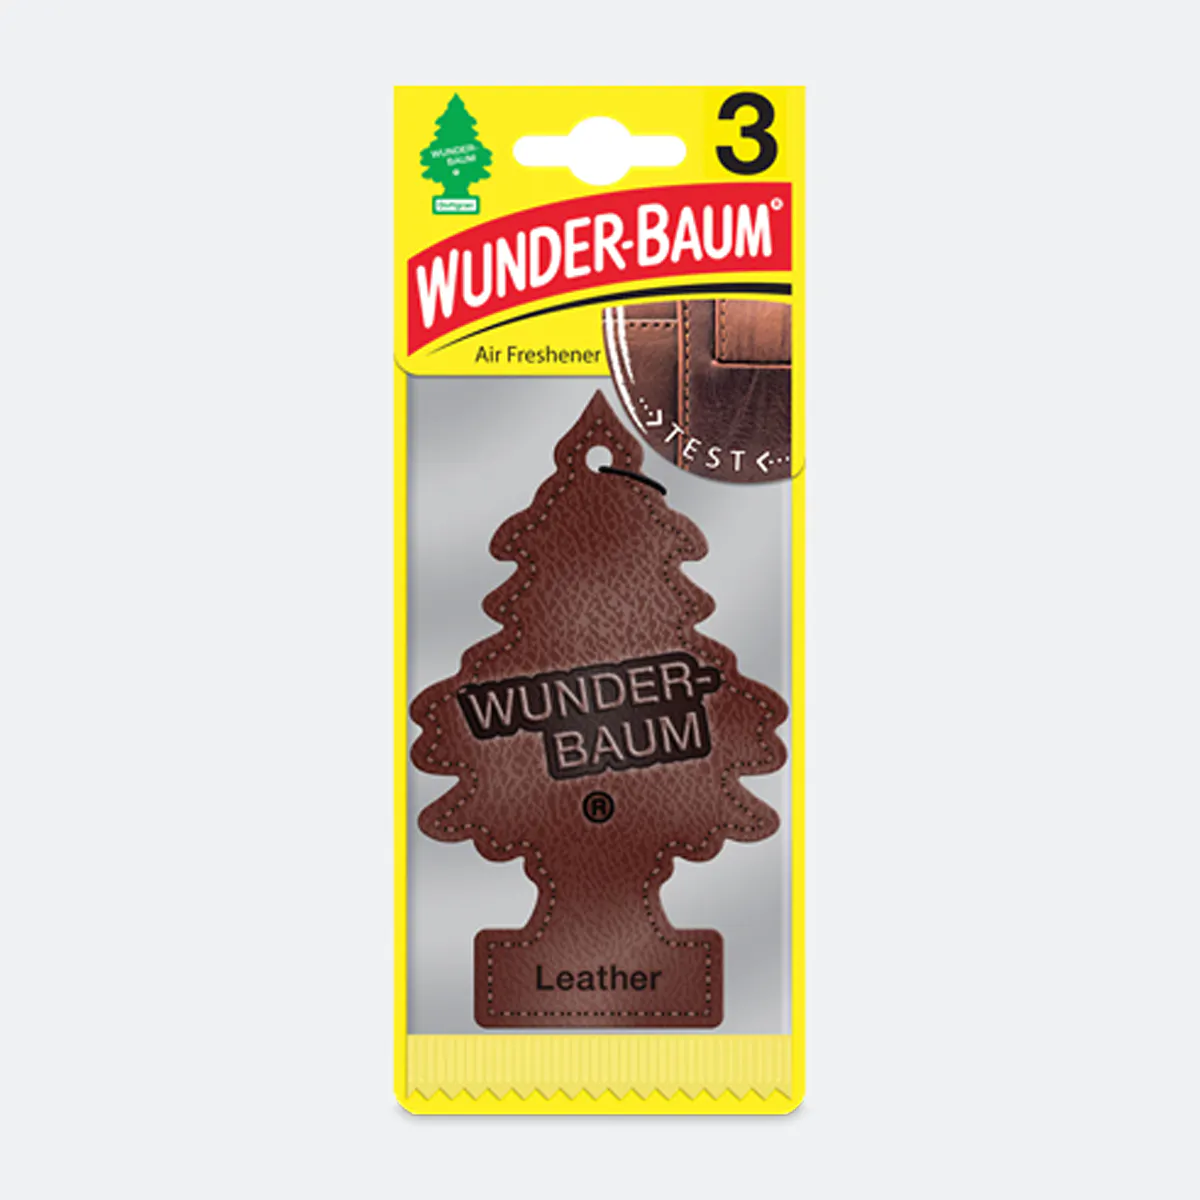 Wunderbaum leather 3pack